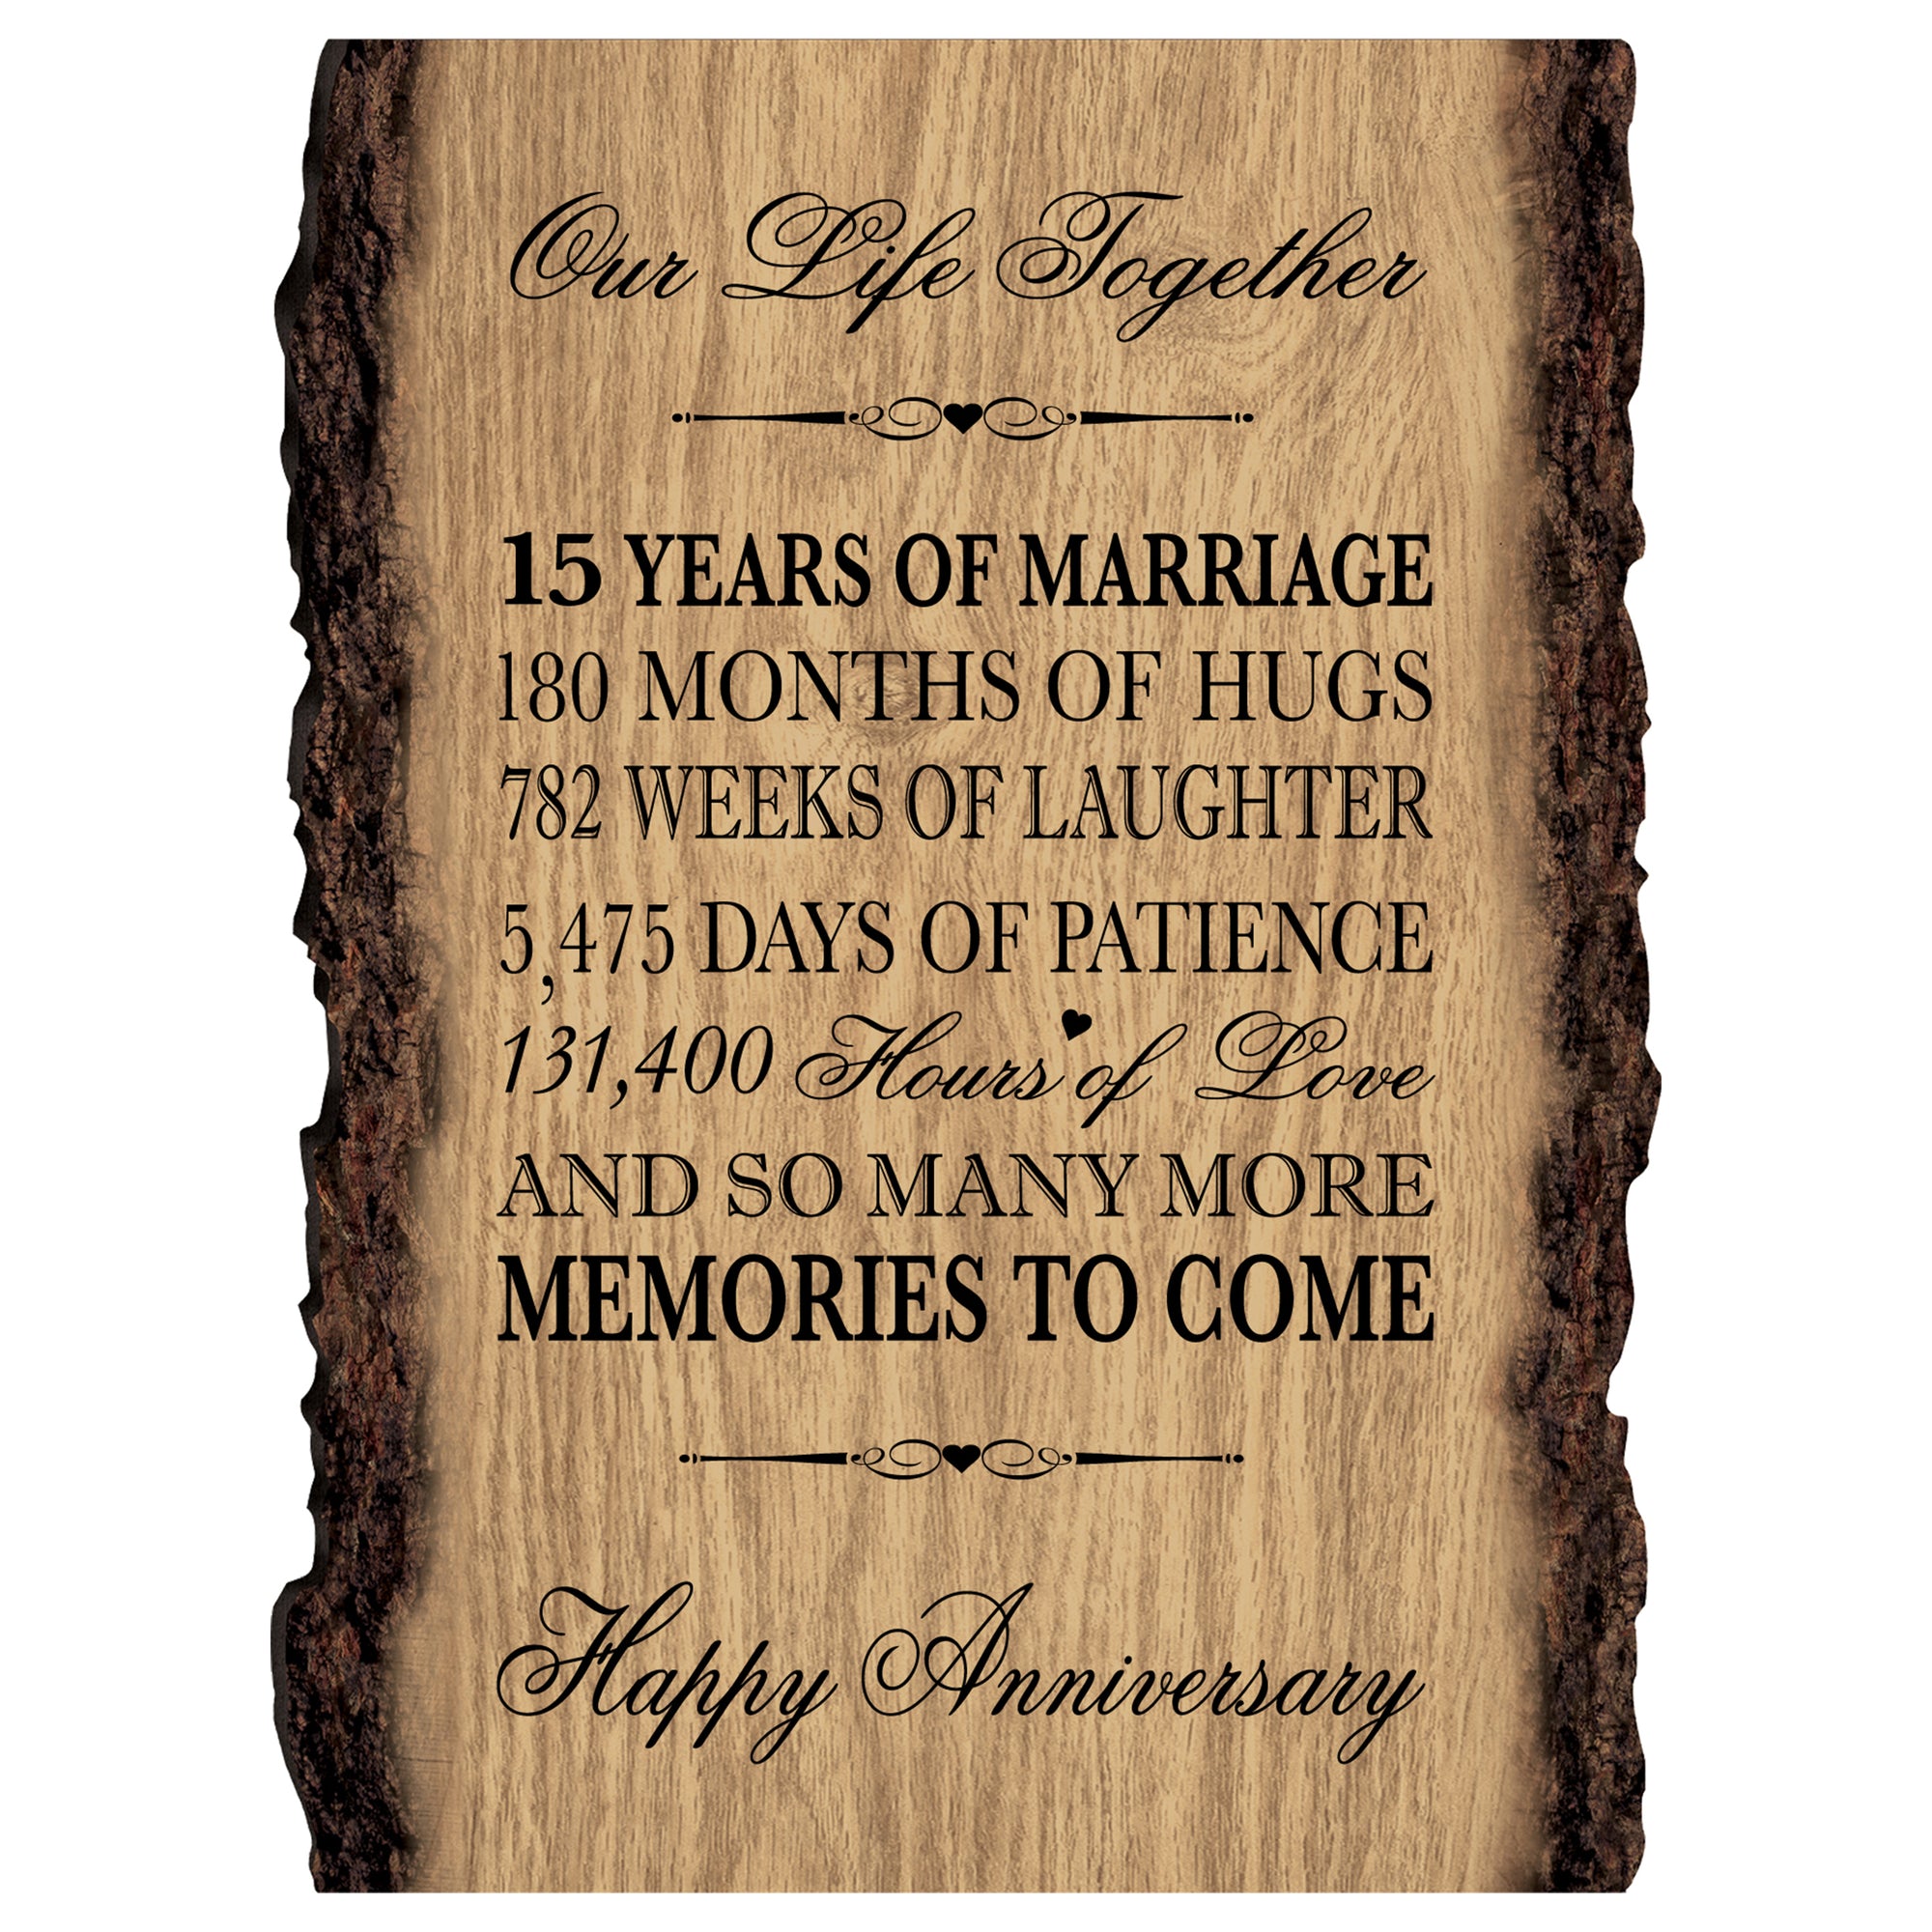 Wooden Wedding Anniversary Wall Plaque Gift 9x12 | 15 Years Of Marriage